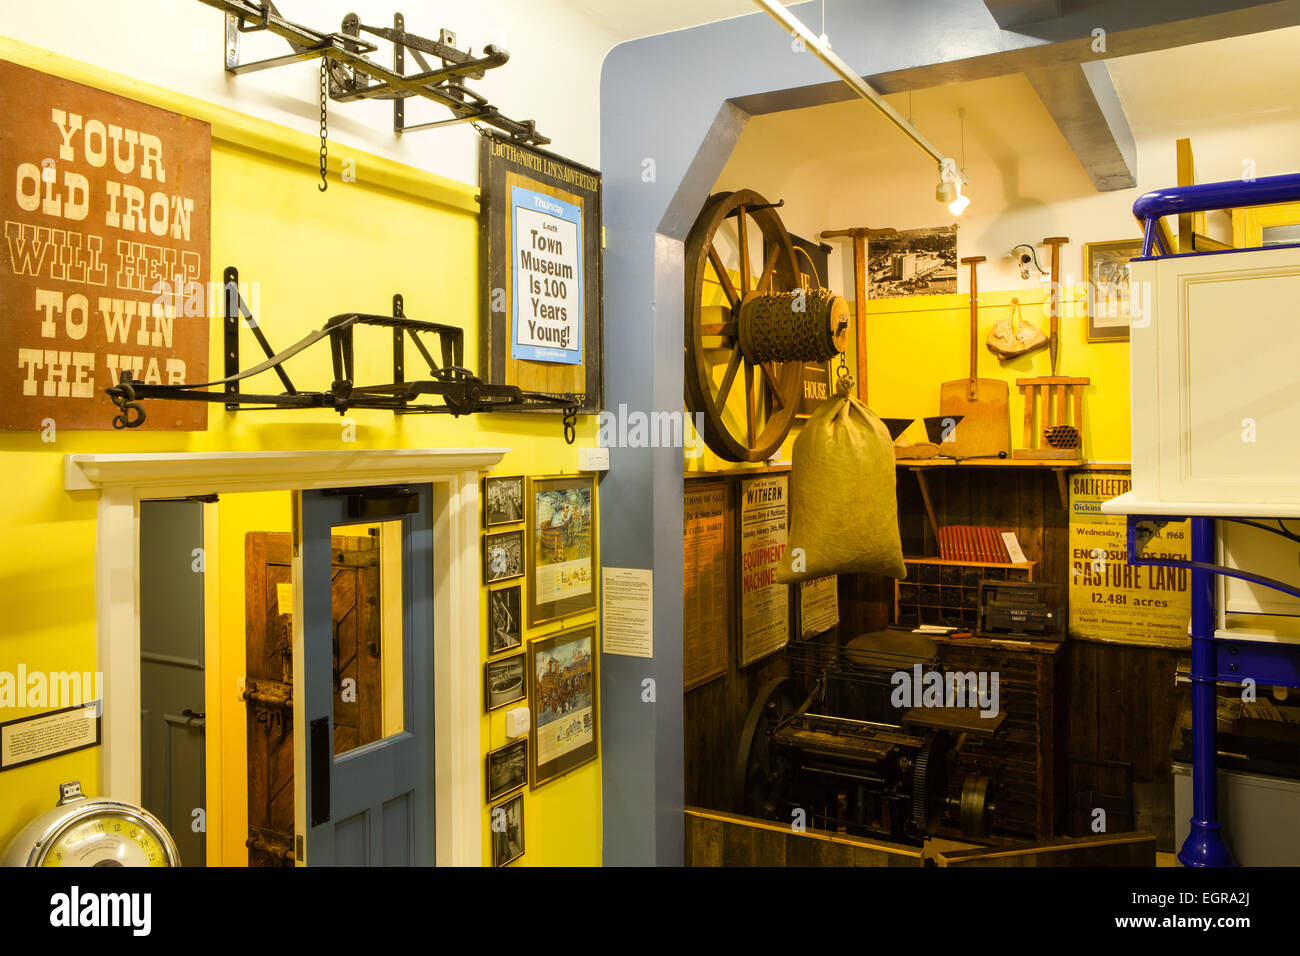 Louth Museum in der Markt Louth, bekannt als "The Capital of Lincolnshire Wolds". Februar 2015. Stockfoto